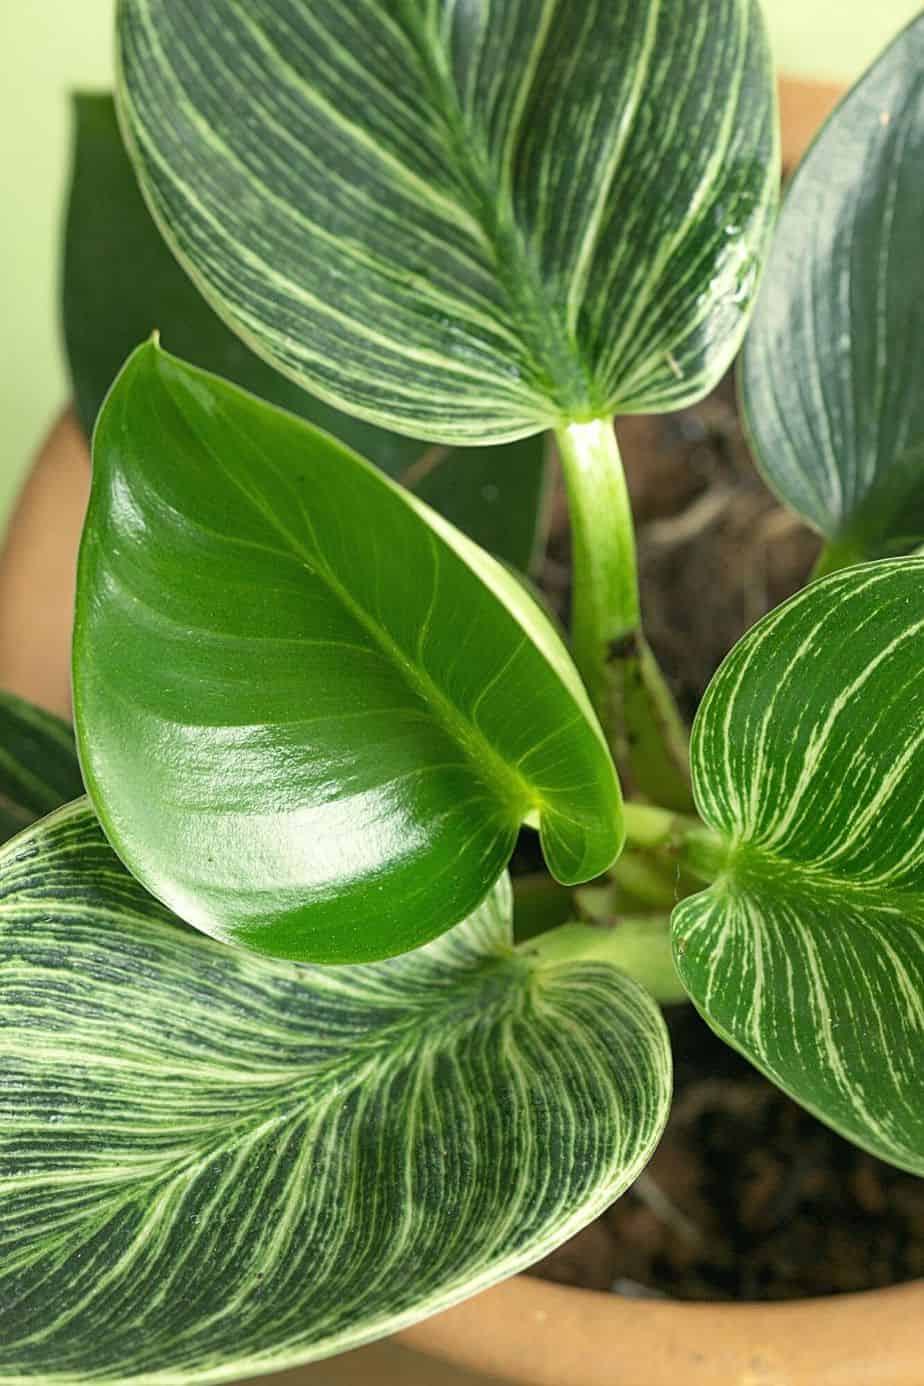 Some Philodendron Birkins will have leaves all green in color, some will have all-white, or half-moon zone